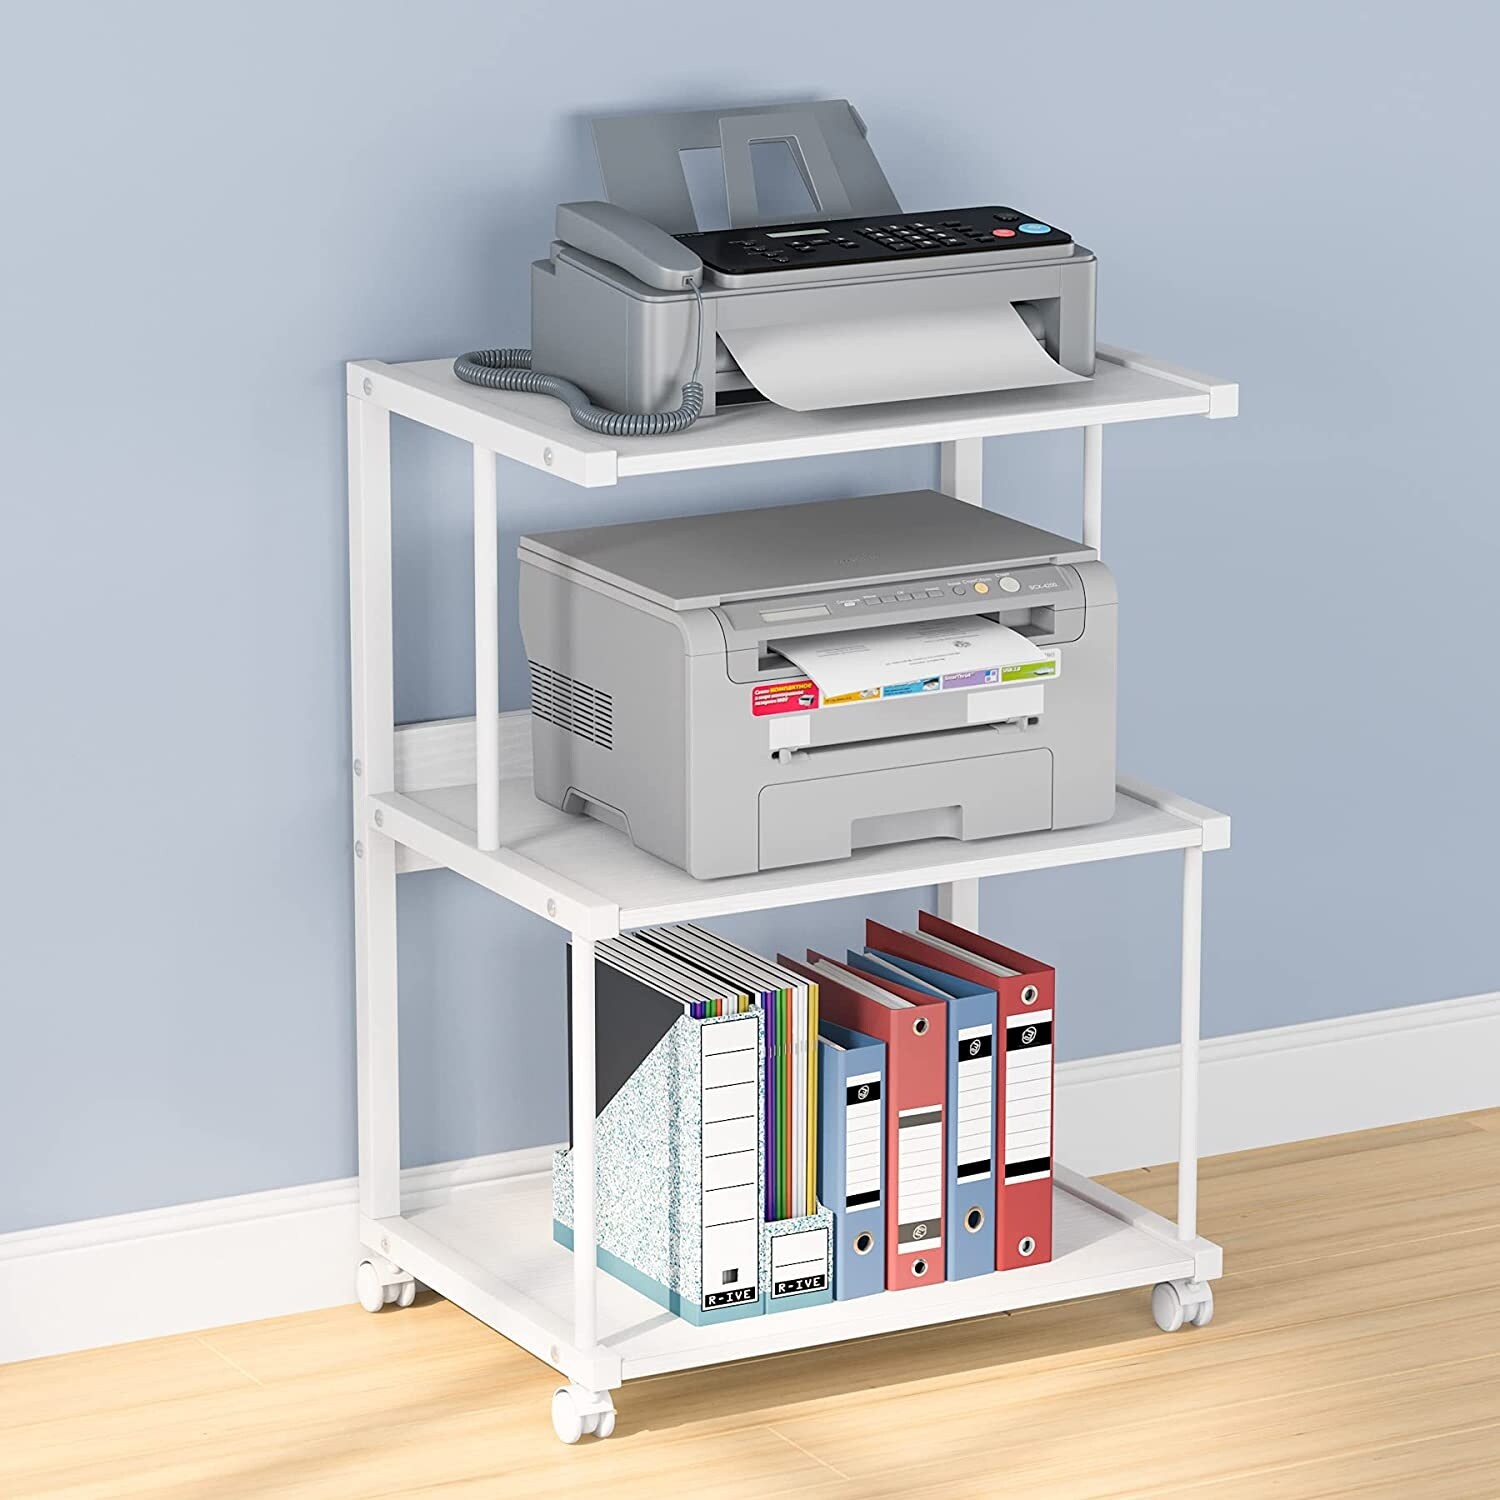 https://ak1.ostkcdn.com/images/products/is/images/direct/ad92d712f37bfcdc3c516e337930b9cbc731cc57/3-Shelf-Mobile-Printer-Stand-with-Storage-Shelves%2C-Rolling-Printer-Cart-Machine-Stand-for-Office.jpg